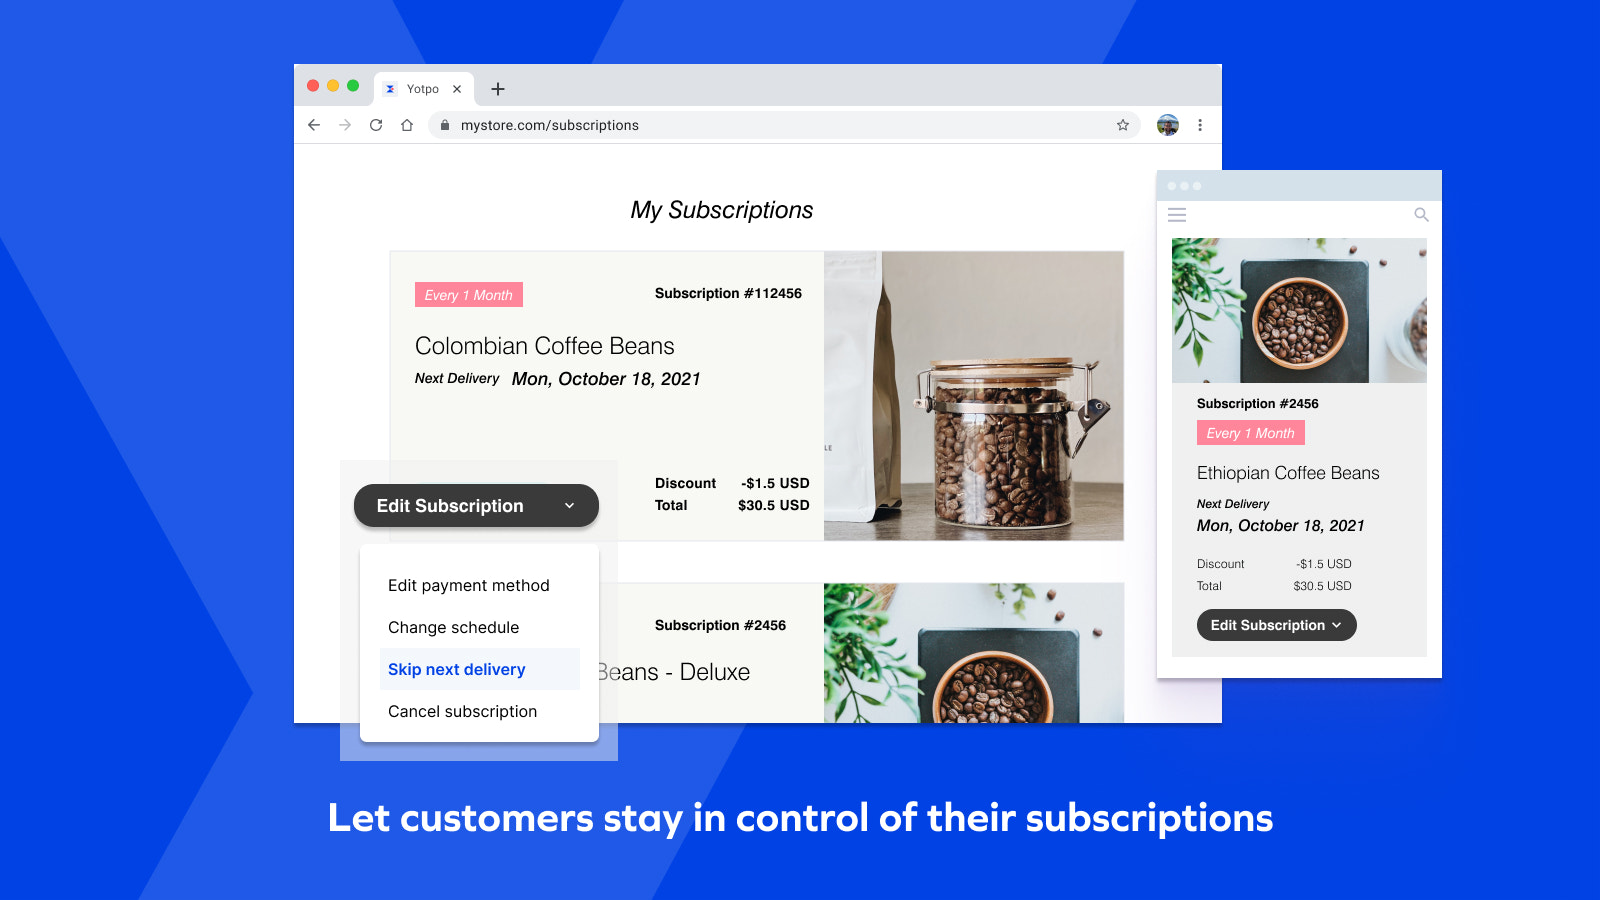 Customers can self control subscriptions